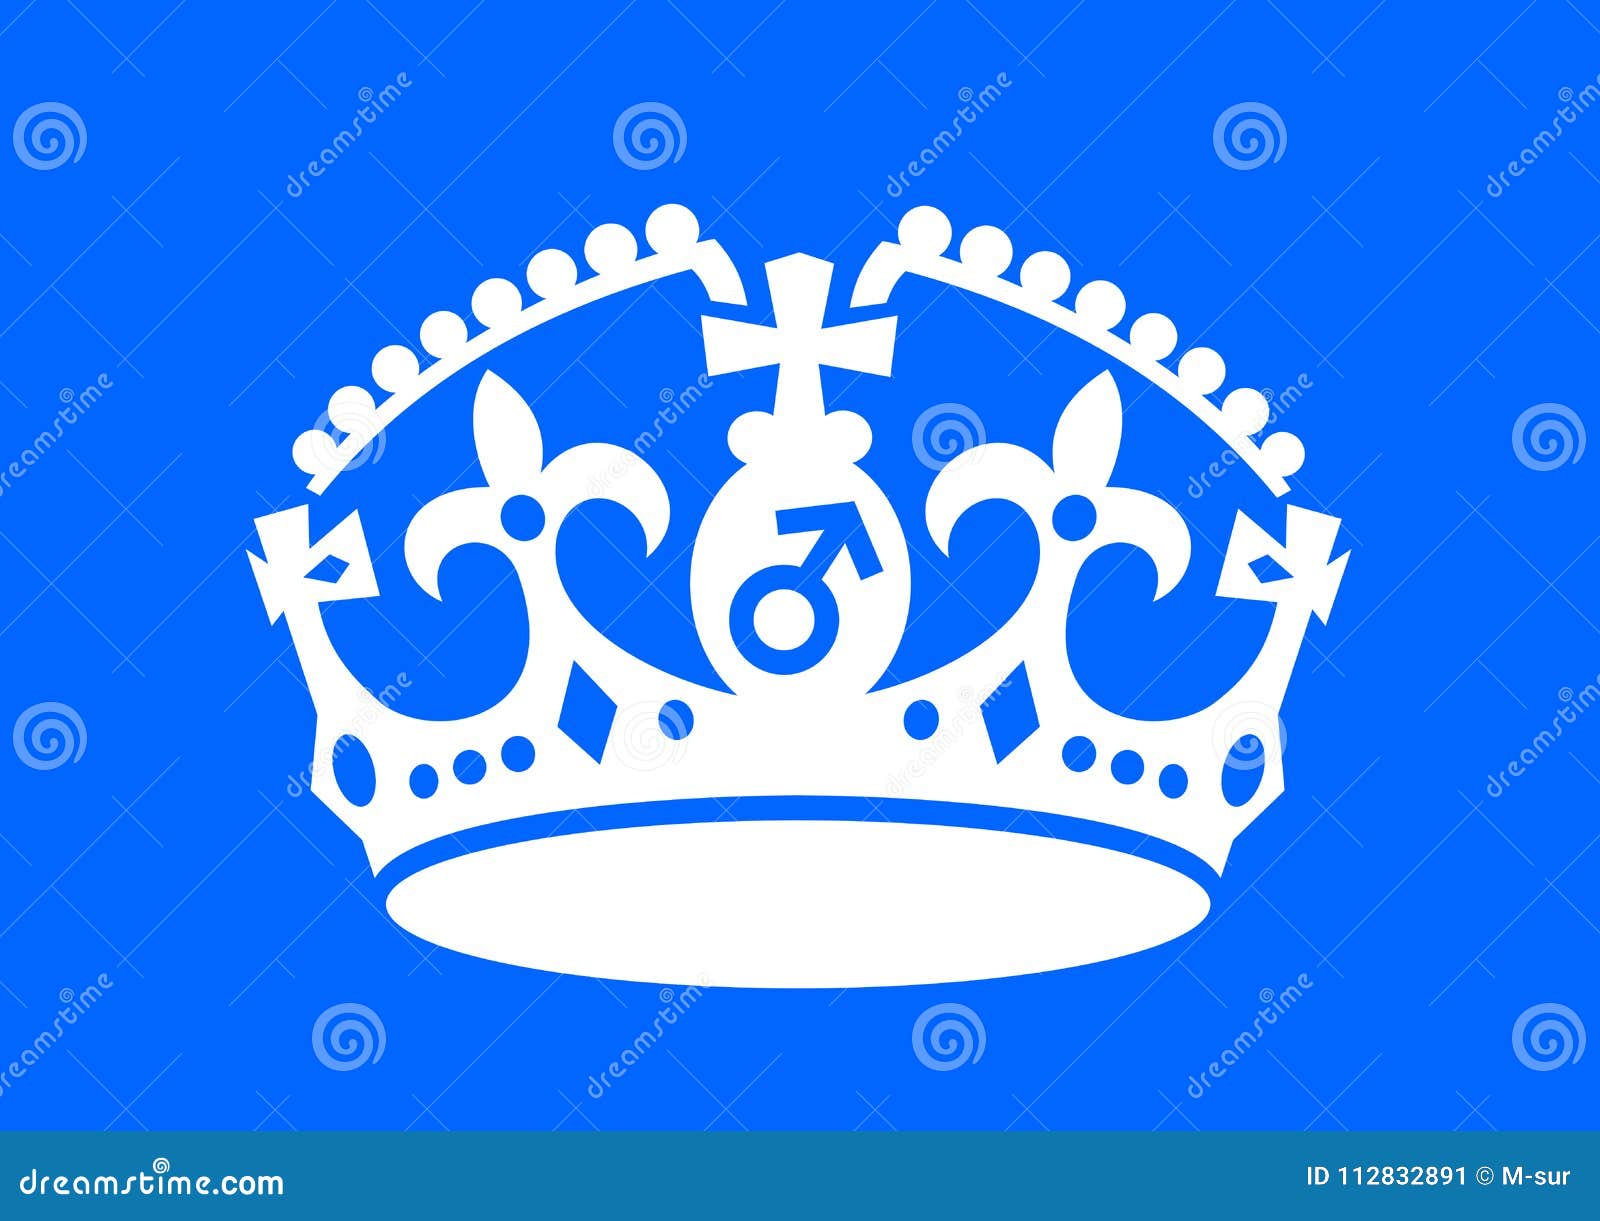 crown of patriarchy and patriarchal government